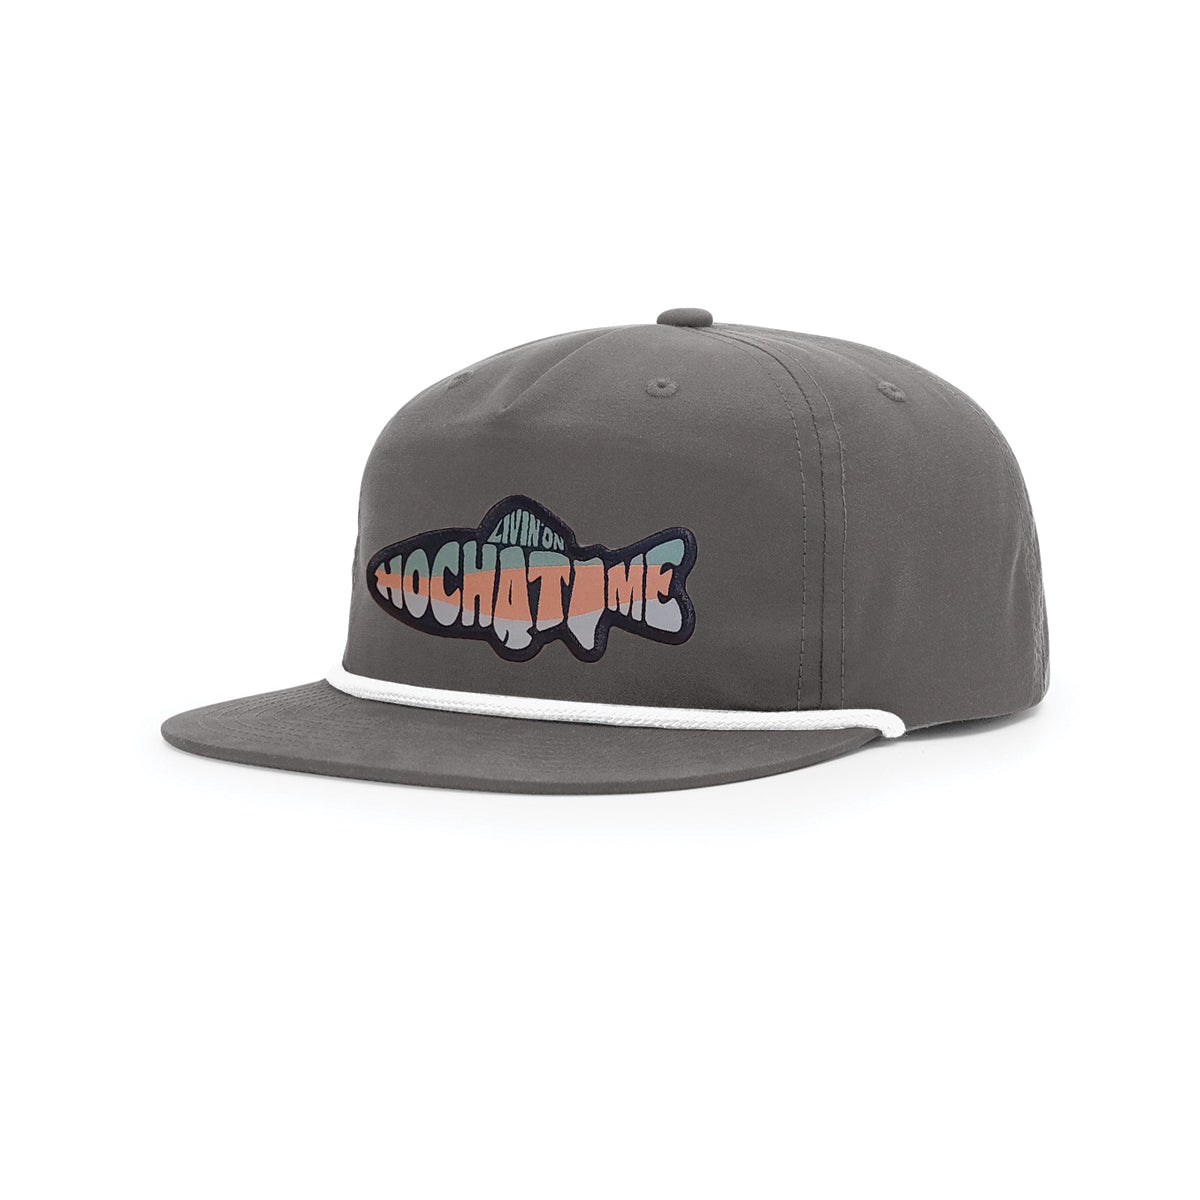 All About Trout Hat - Black Rainbow 6 Panel Hat